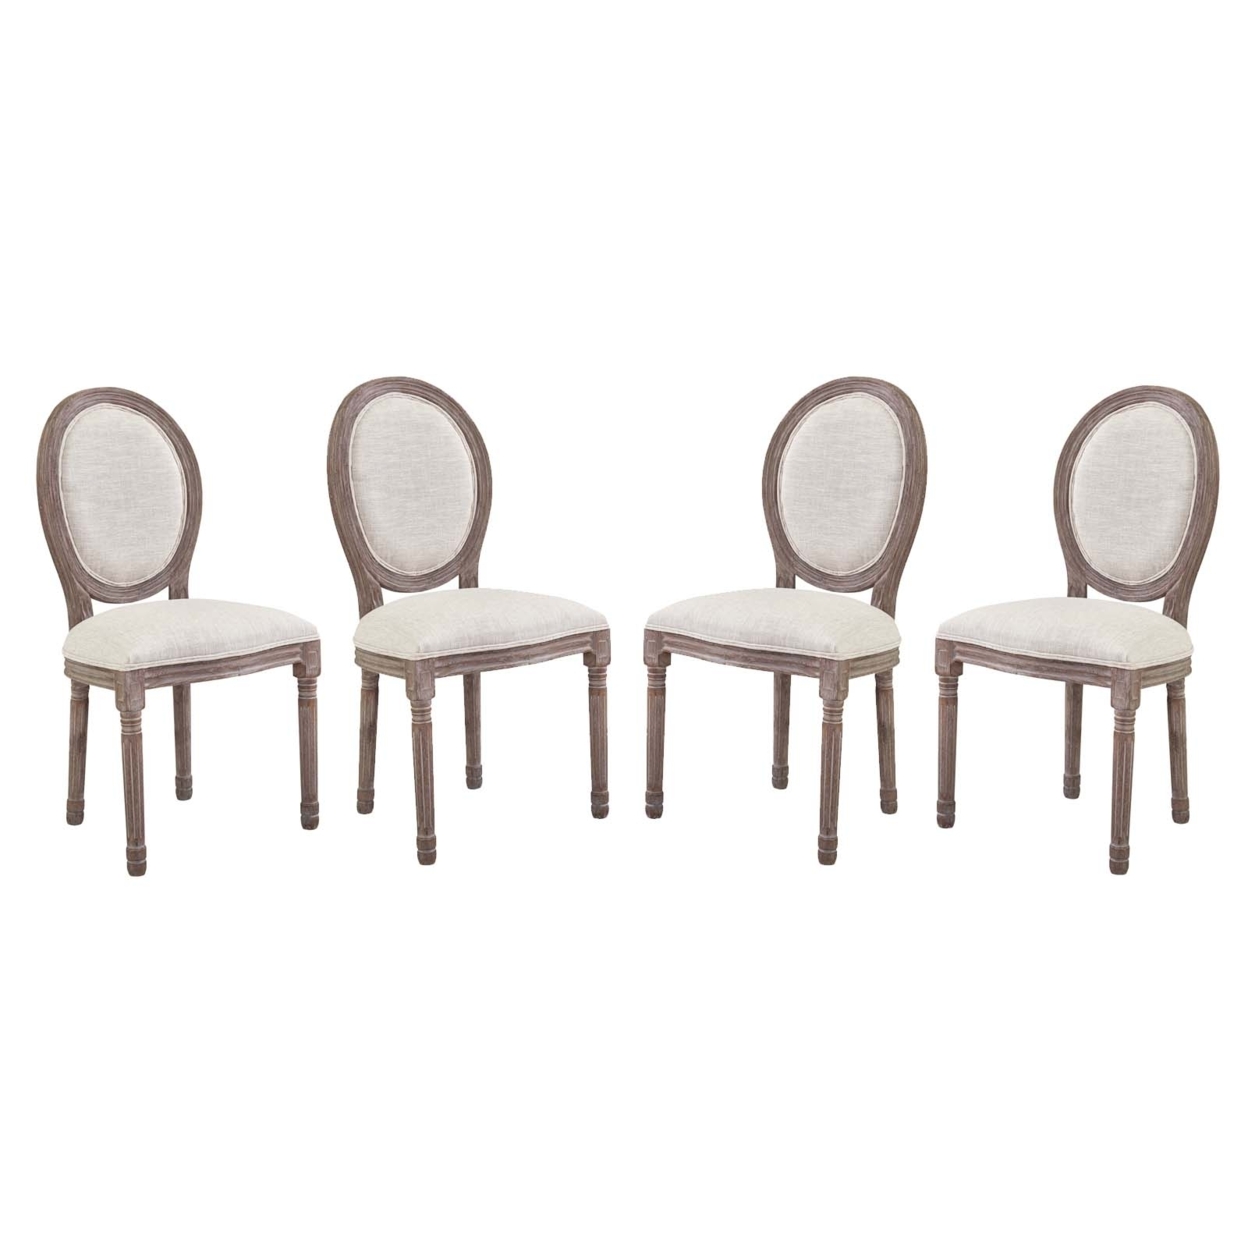 Emanate Dining Side Chair Upholstered Fabric Set Of 4,Beige